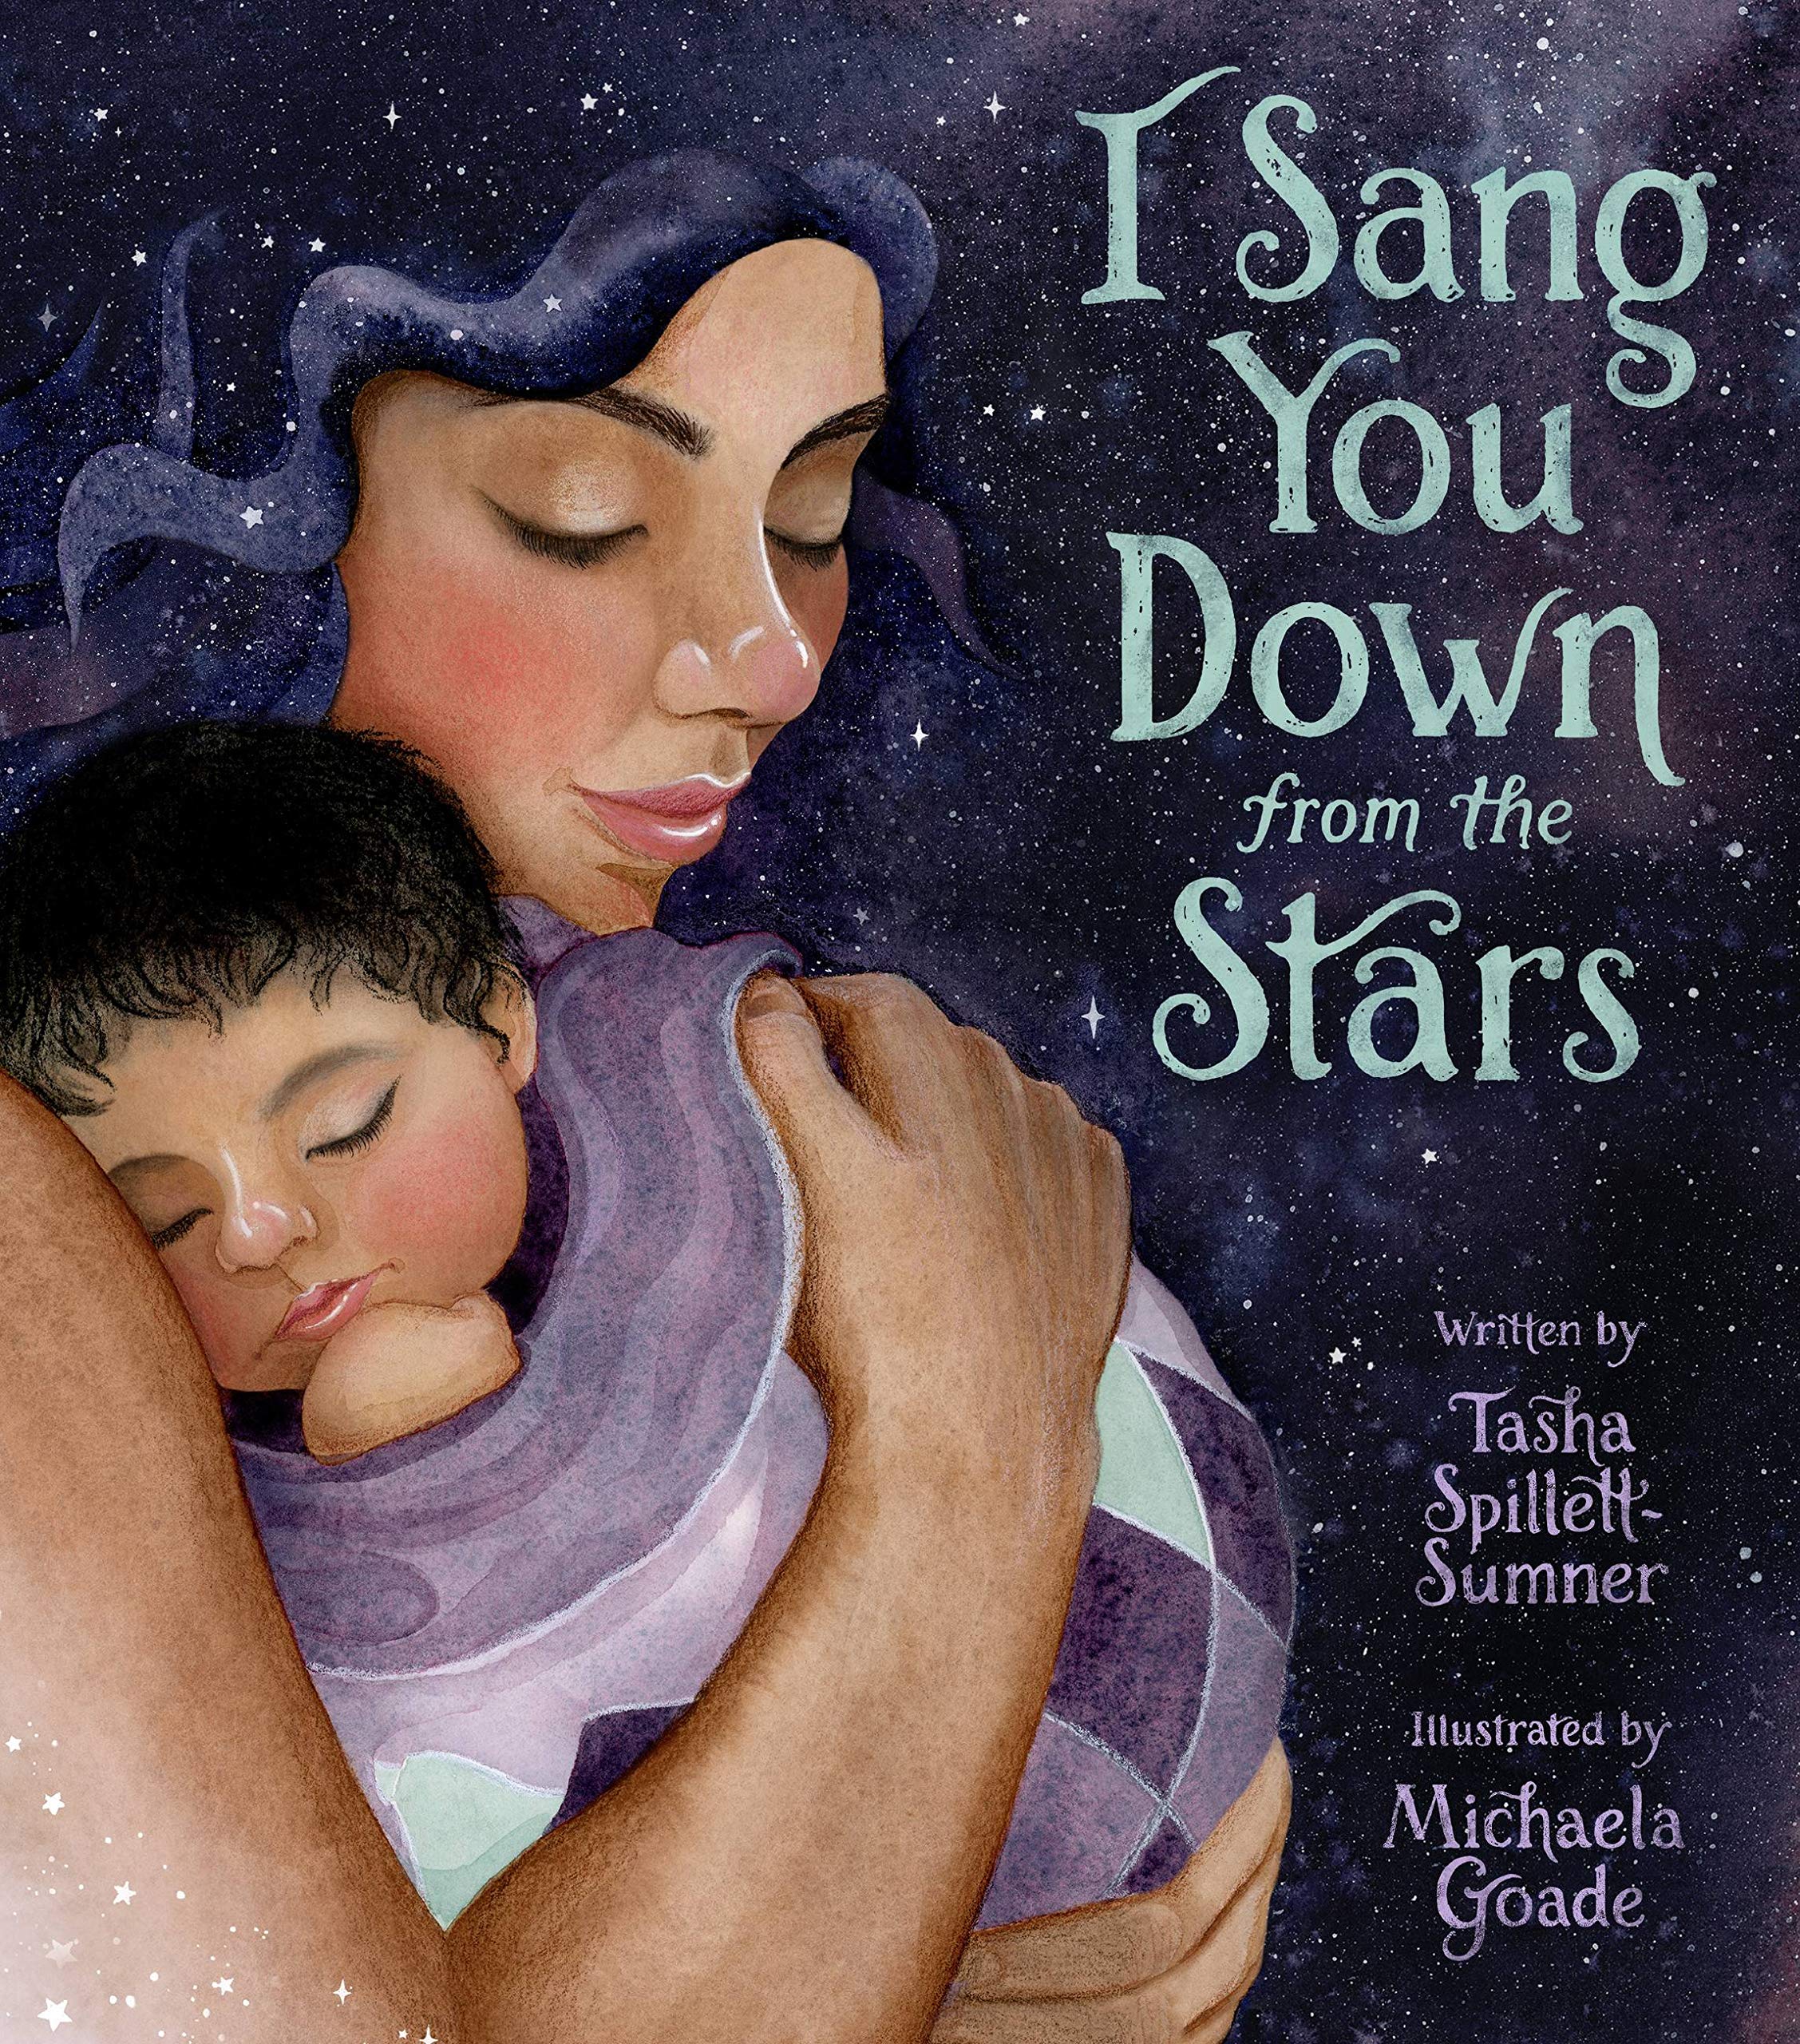 image for "I sang you down from the stars"